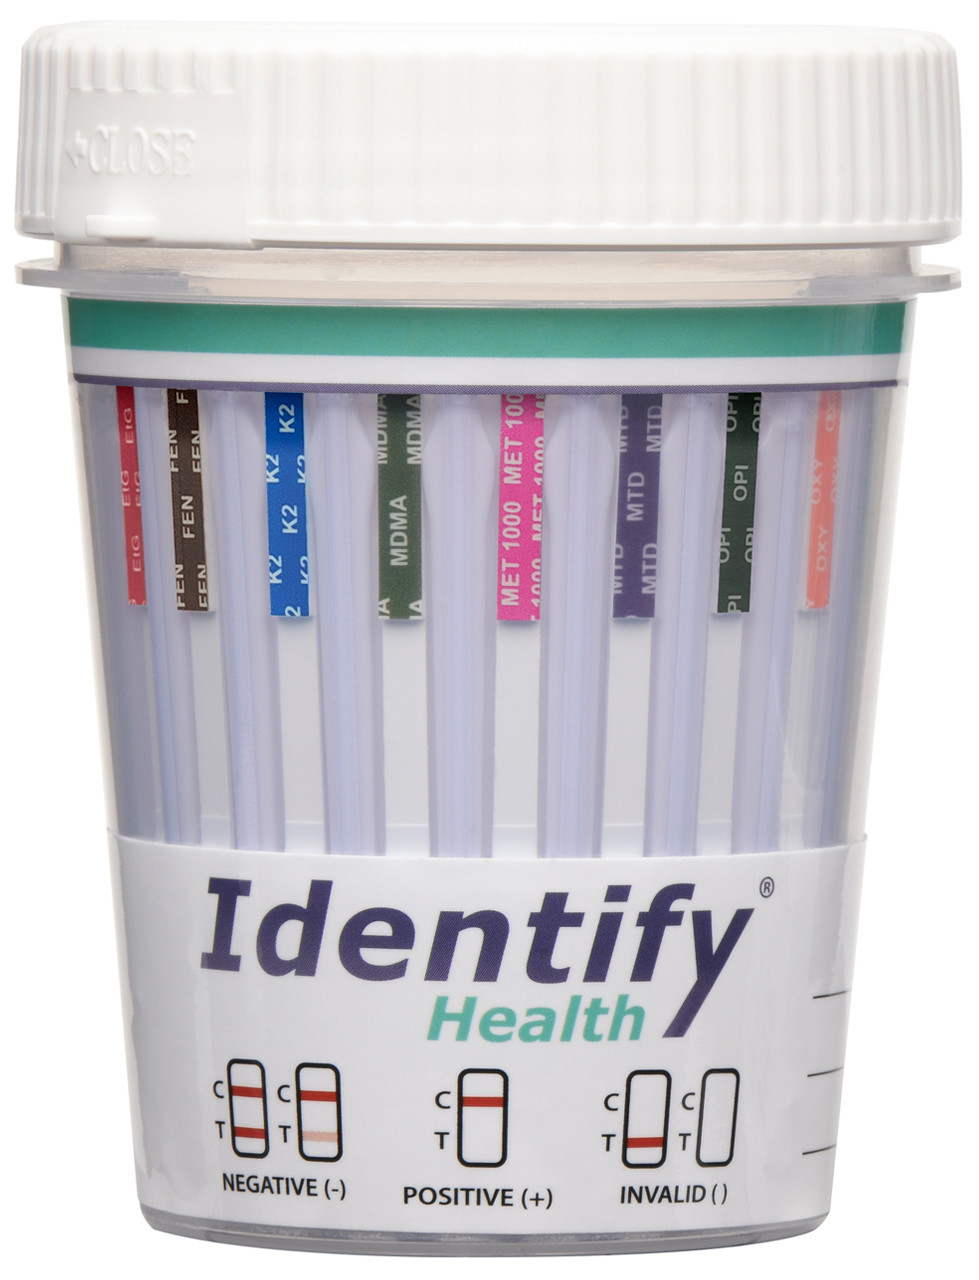 Identify Health 14 Panel Drug Test Cup with FEN Fentanyl, ETG, K2, TRA, 3  Adulterations